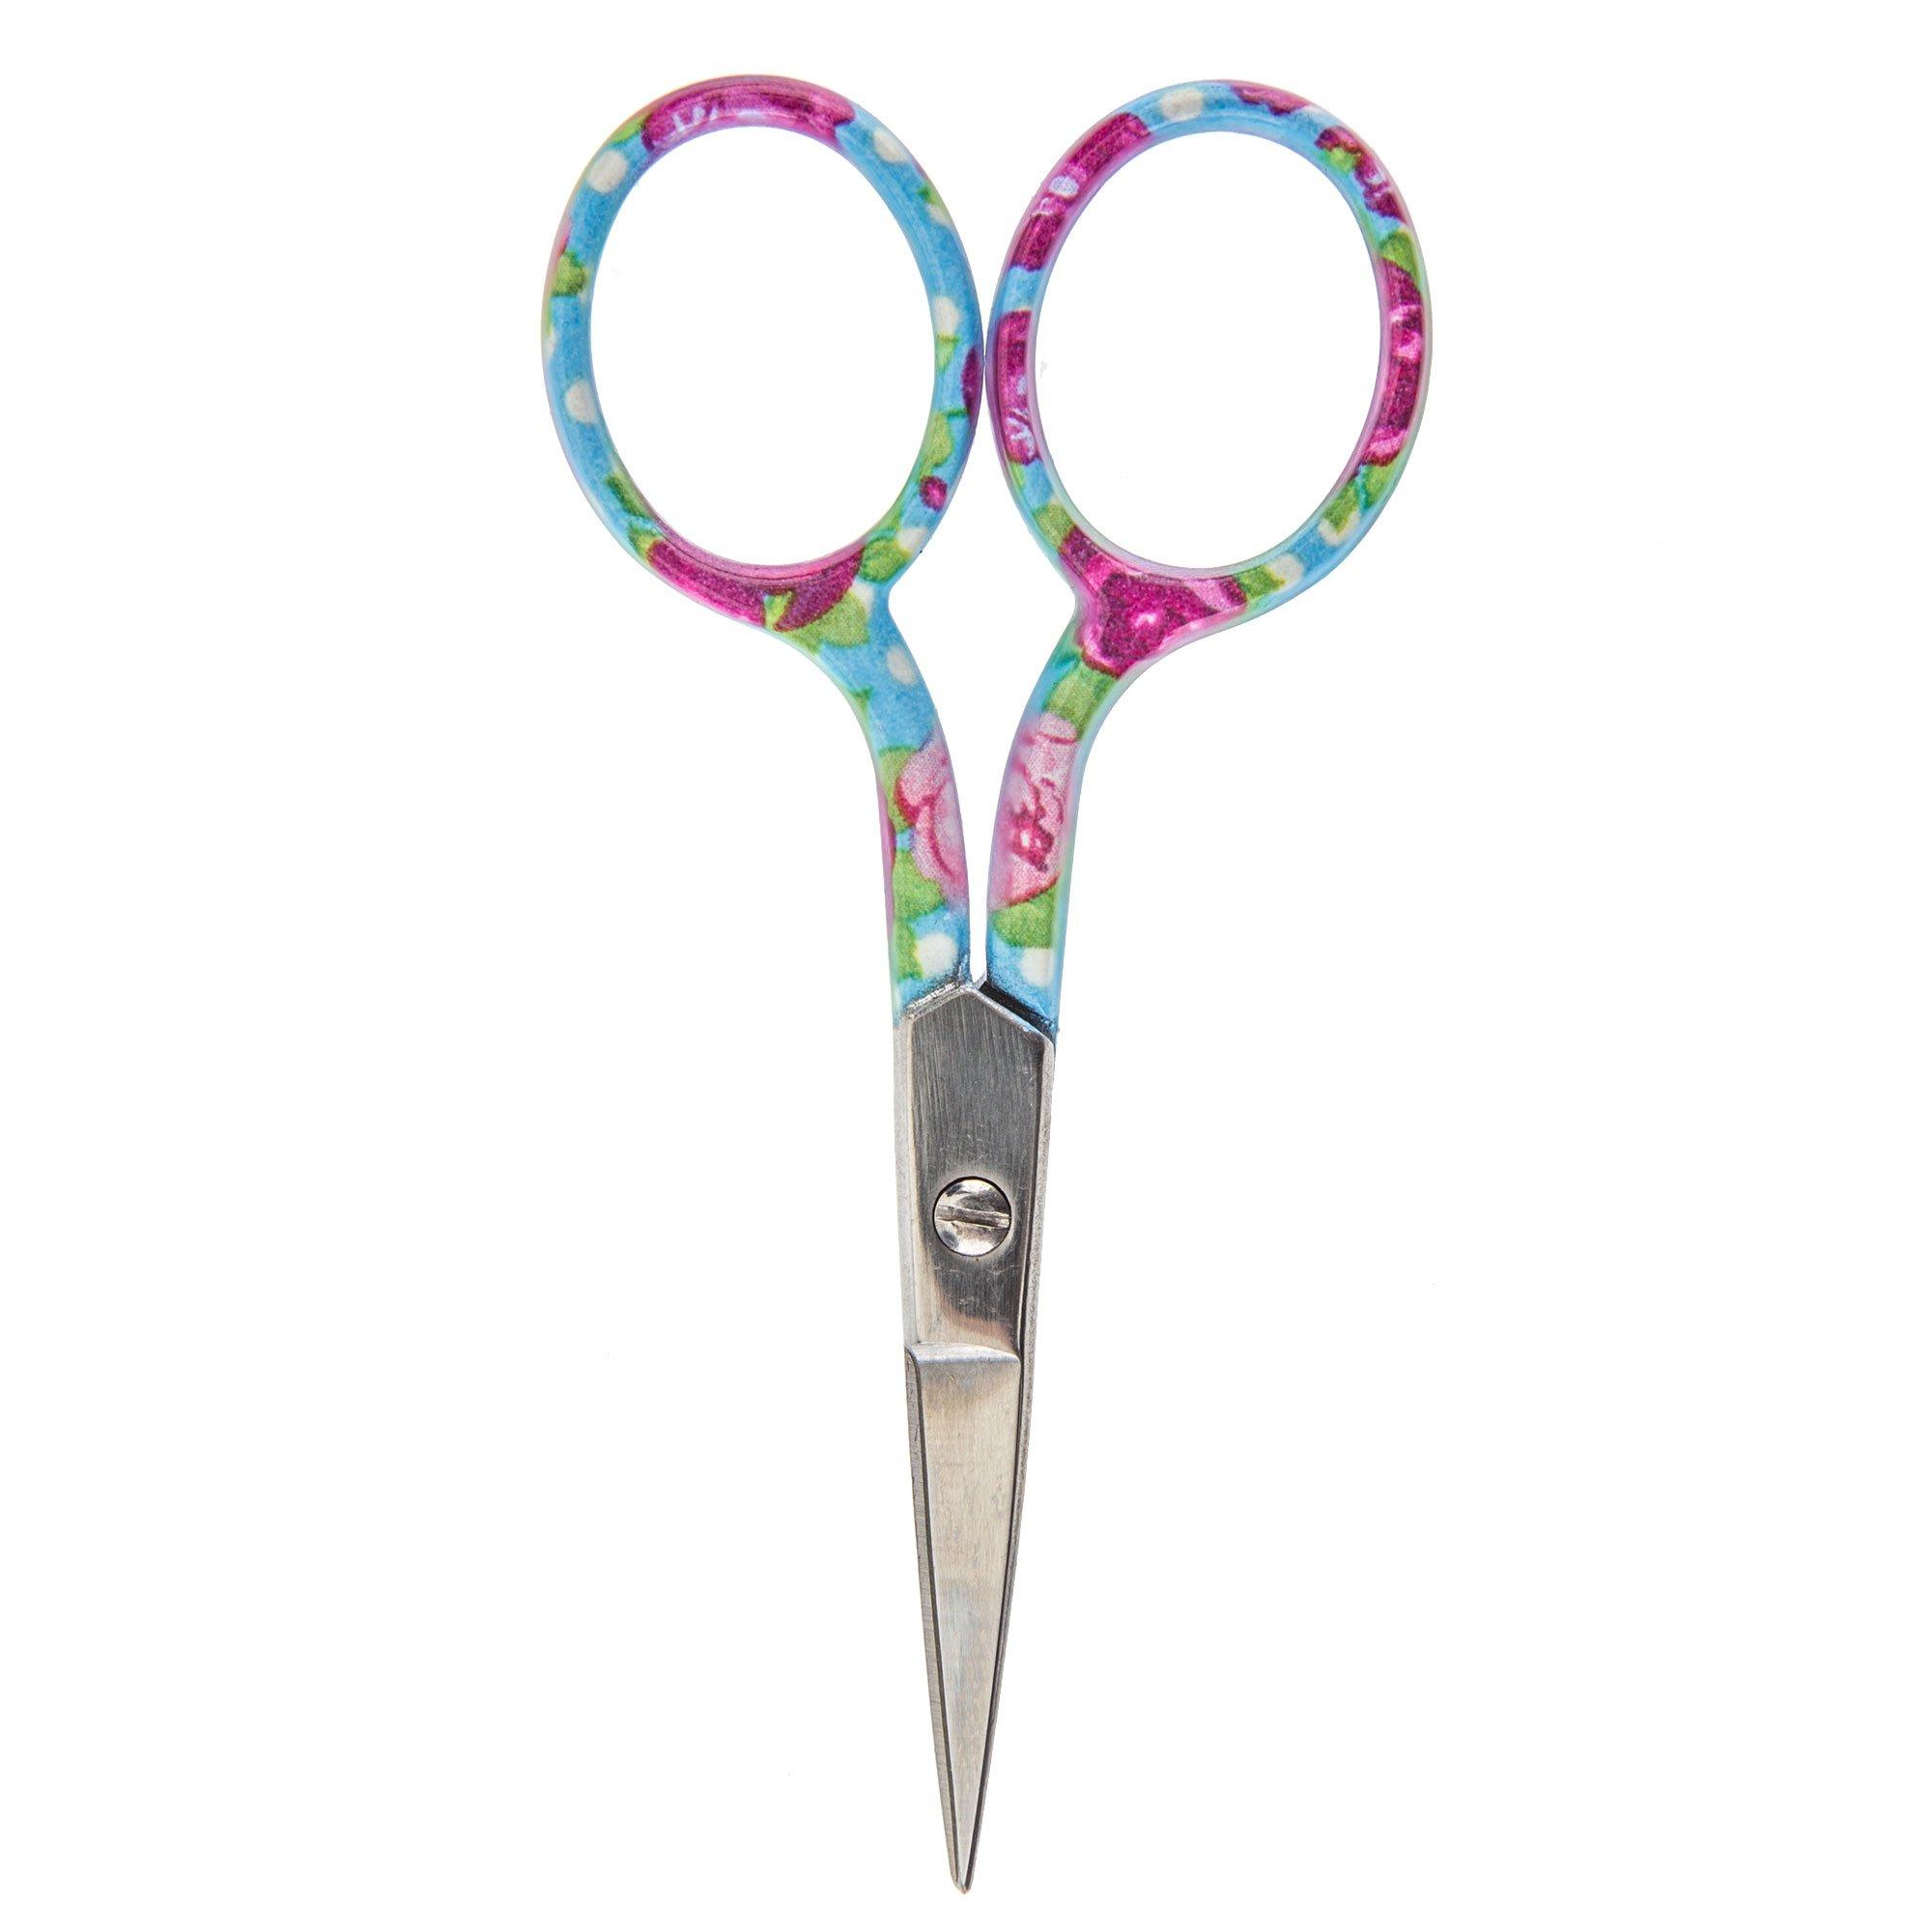 RBB by Gimap ~ Gold Embroidery Scissors ~ Lion Tail – Hobby House  Needleworks